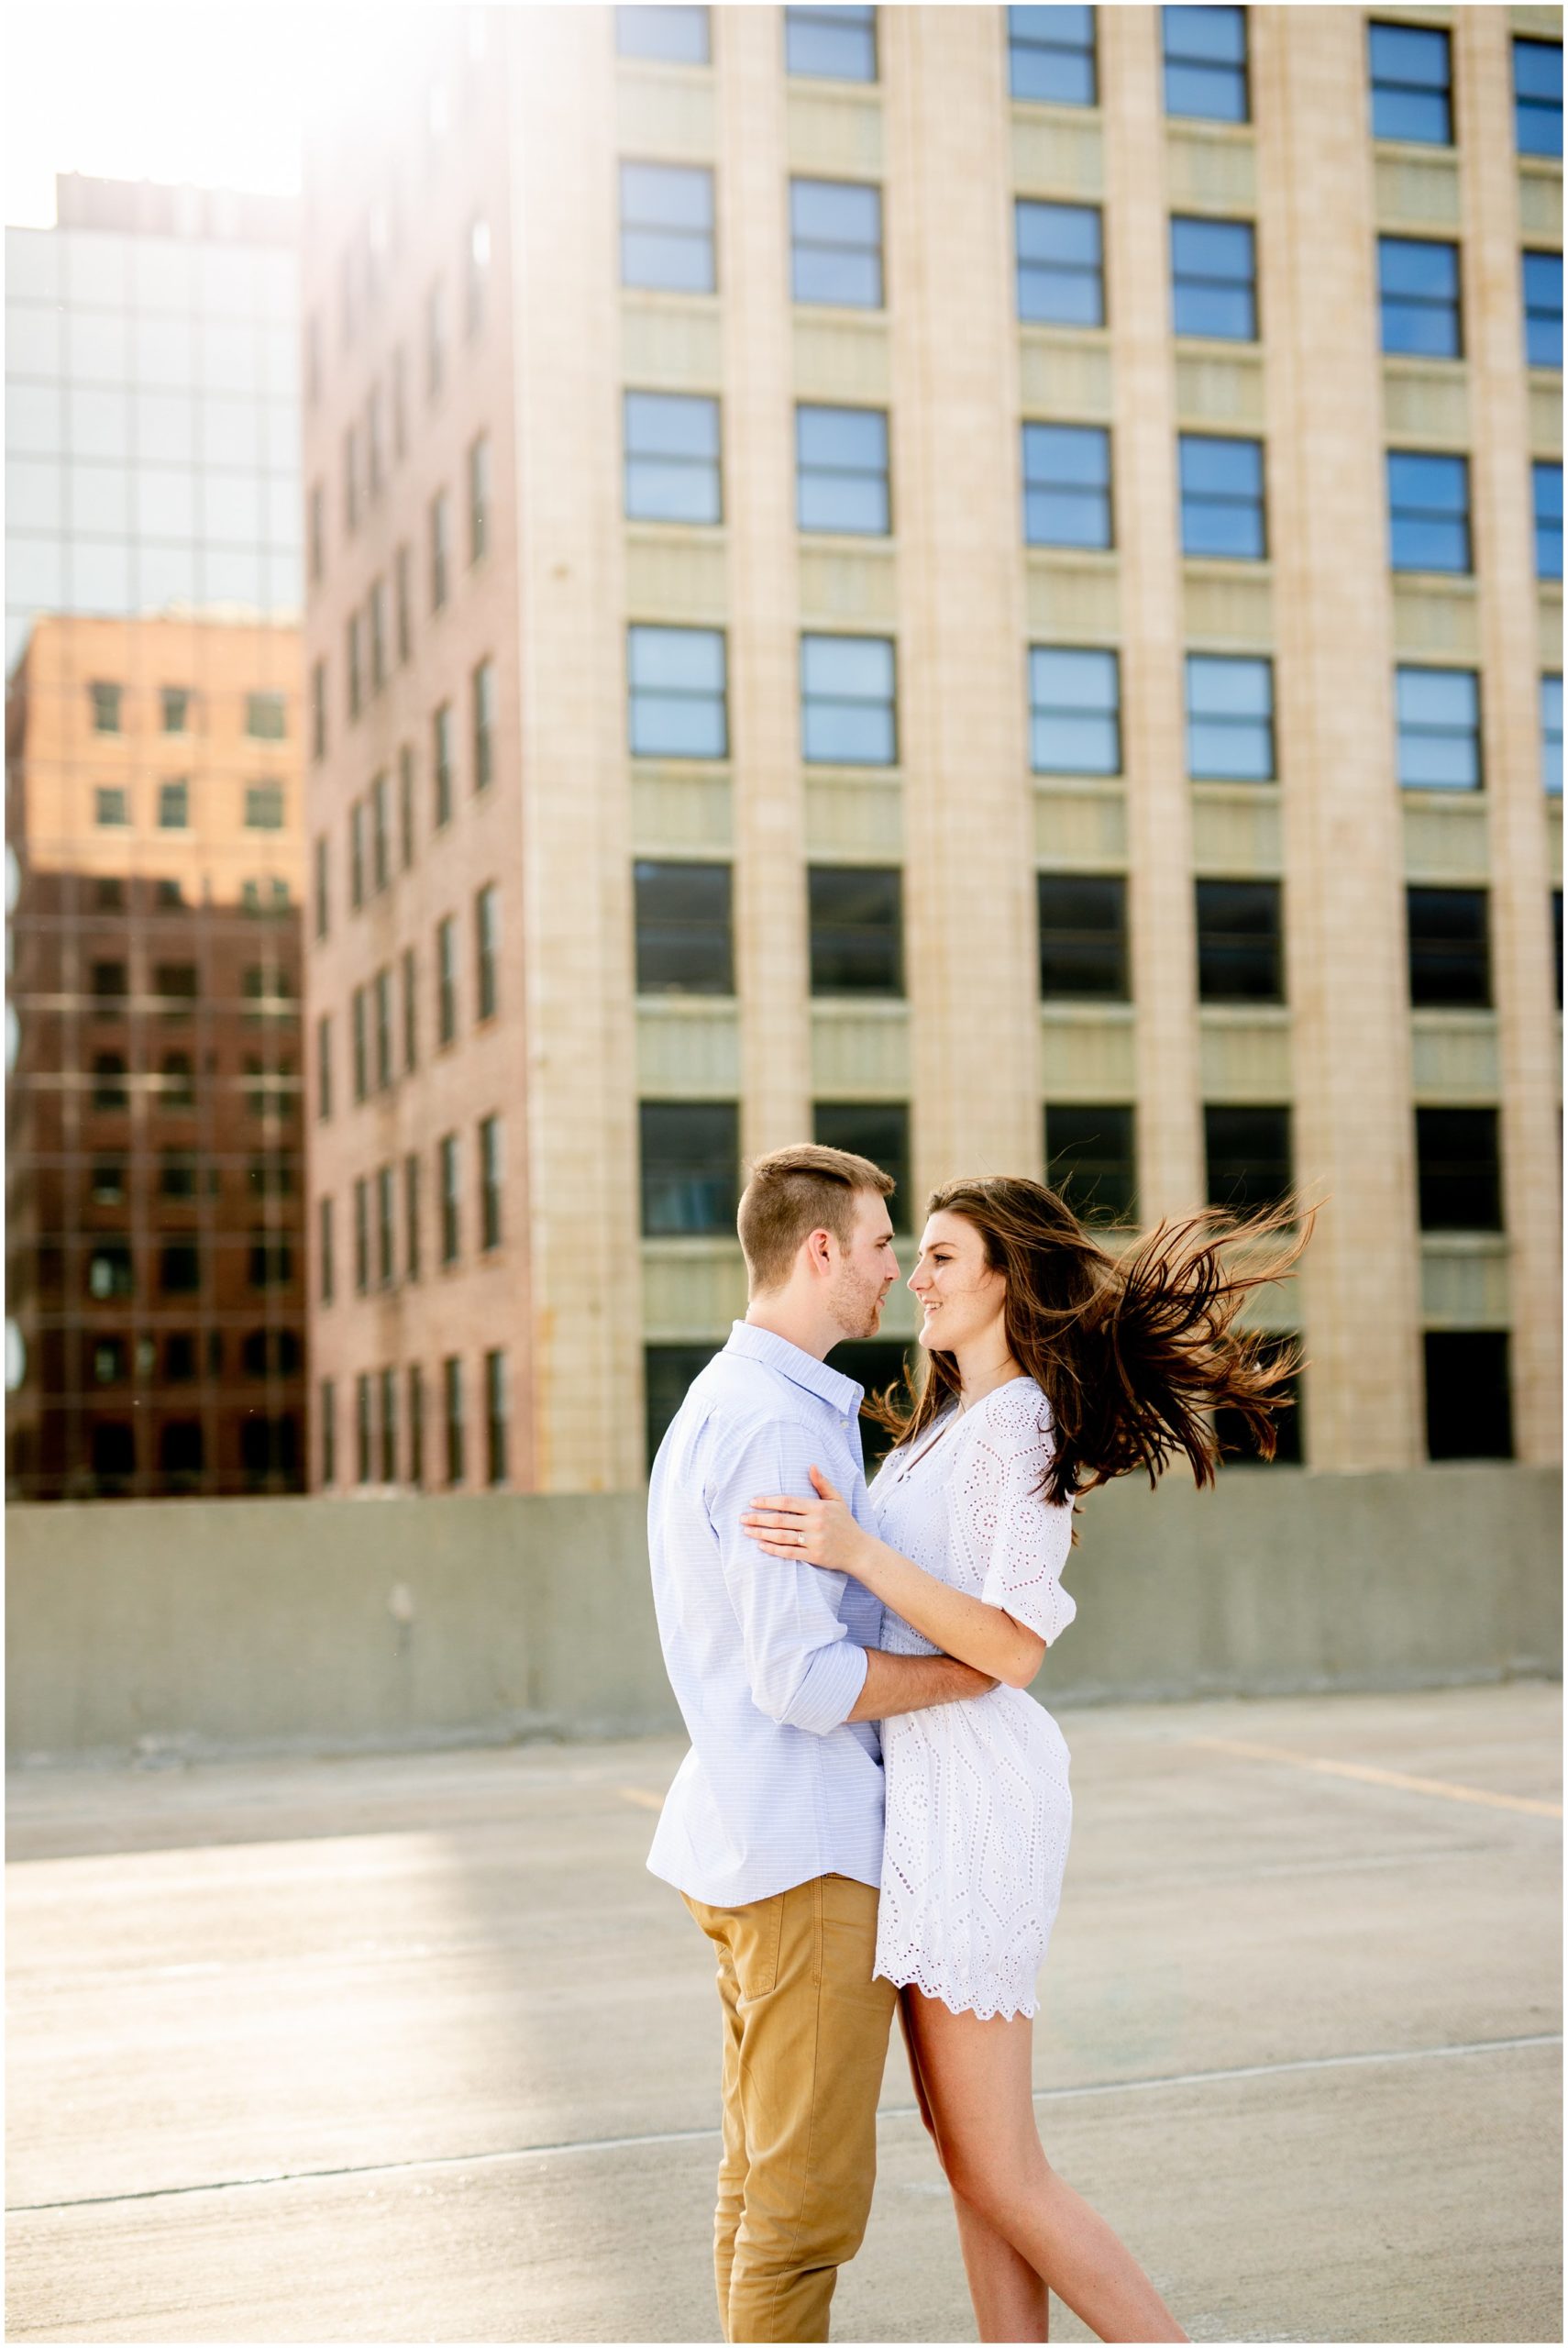 Downtown-Sioux-City-Engagement-Session-37.jpg